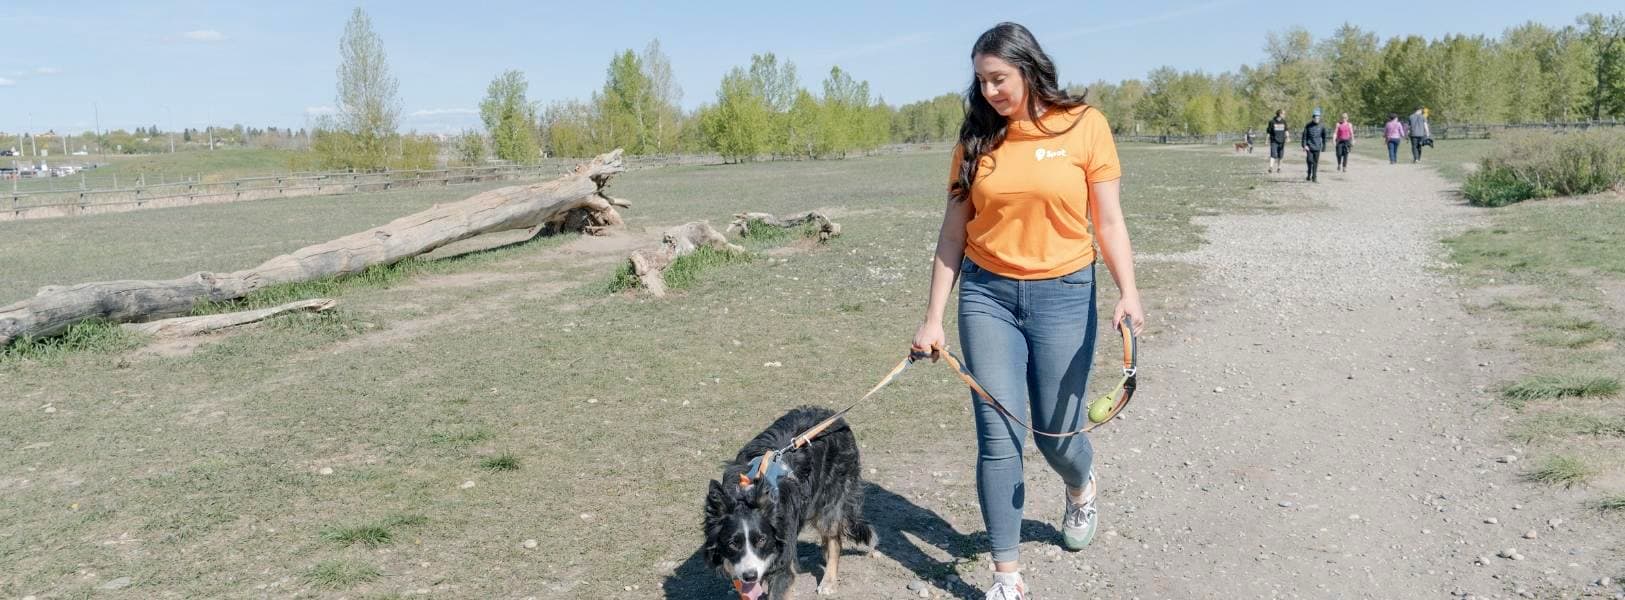 woman walking dog on a gravel walking path - How to Hire Dog Walkers Near You